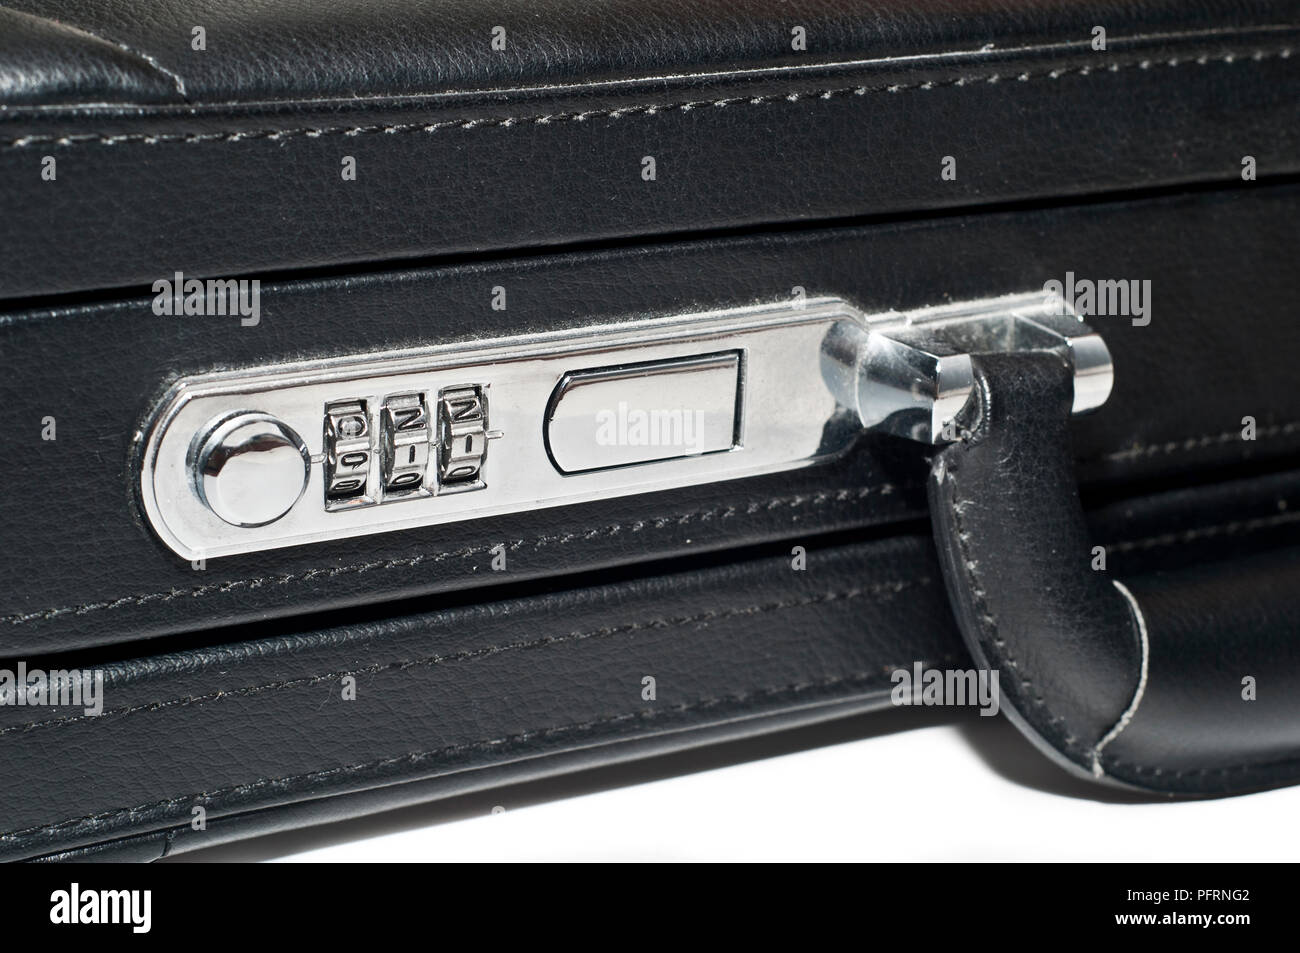 Black briefcase with 911 combination on the lock, close-up Stock Photo